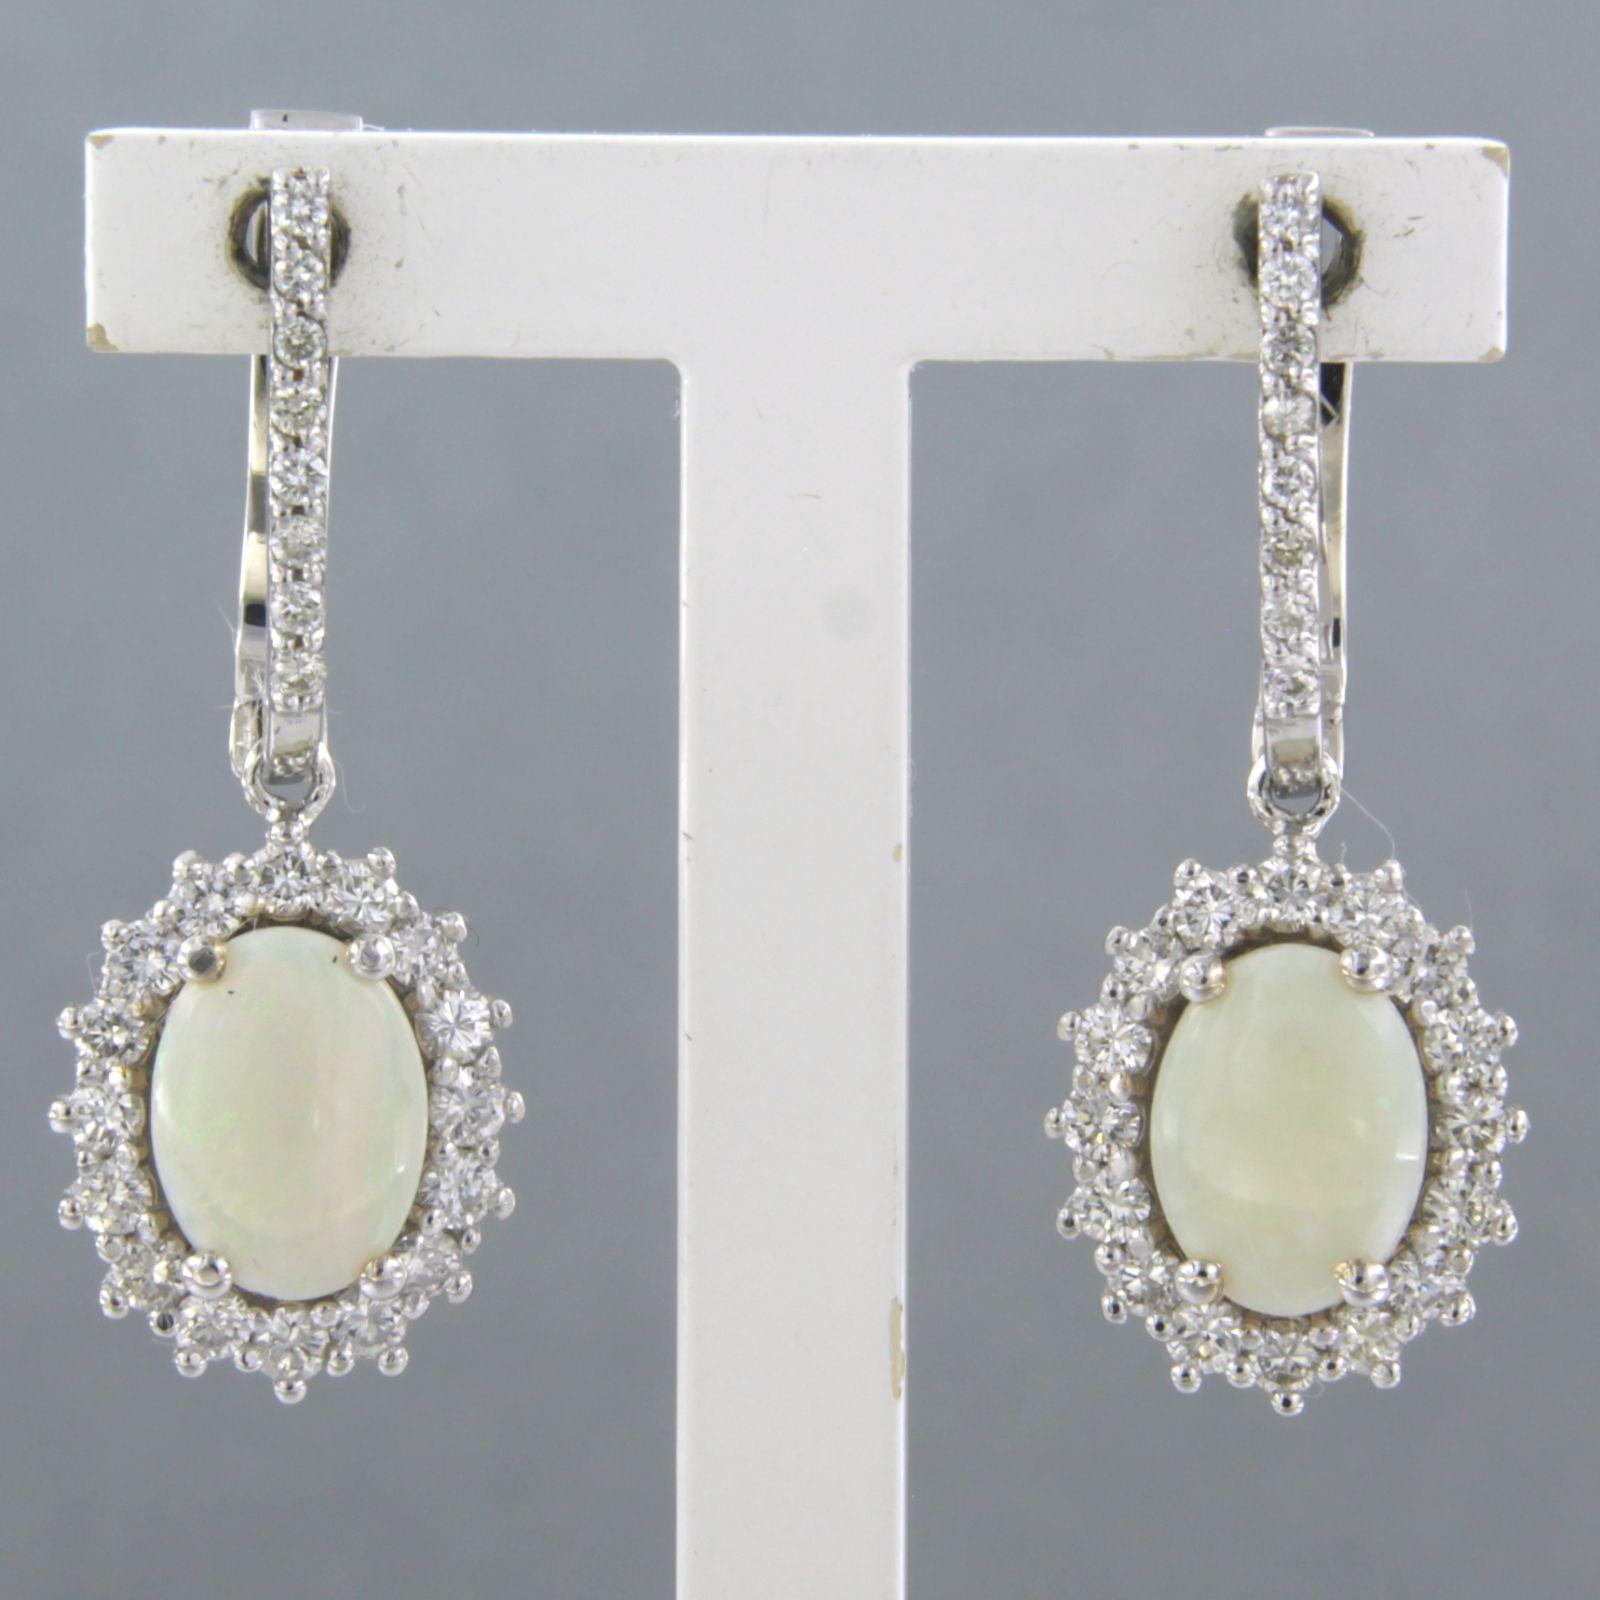 18k white gold earrings set with opal and brilliant and diamonds 0.66ct - F/G - VS/SI

detailed description:

the earrings are 2.8 cm high and 1.0 cm wide

weight 5.8 grams

set with

- 2 x 8 mm x 6 mm oval cabochon cut opal

color white, green,